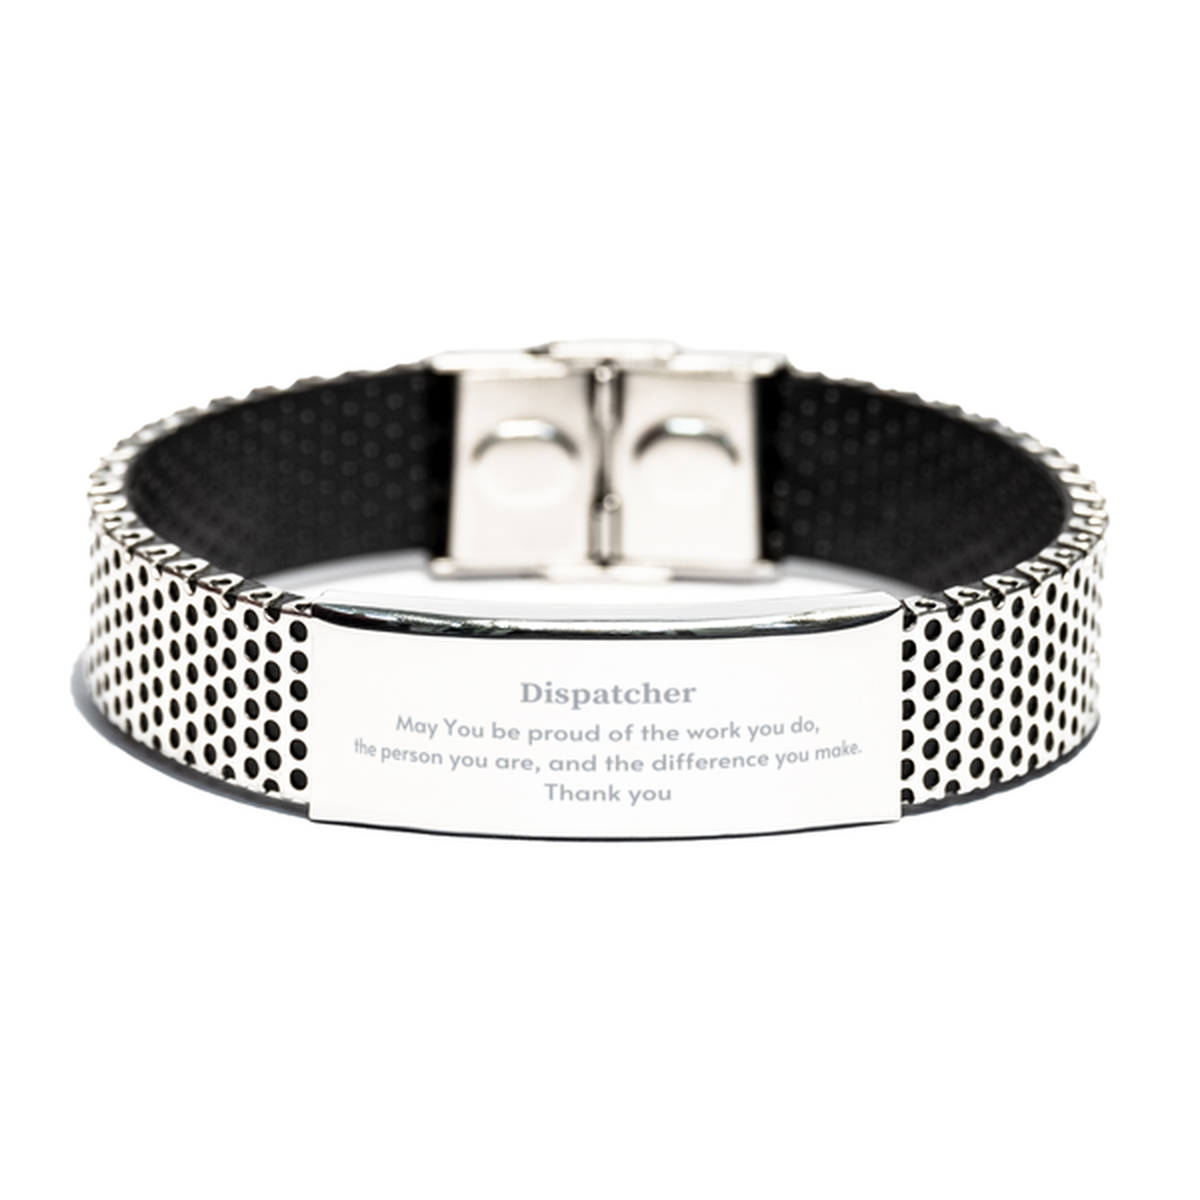 Heartwarming Stainless Steel Bracelet Retirement Coworkers Gifts for Dispatcher, Dispatcher May You be proud of the work you do, the person you are Gifts for Boss Men Women Friends